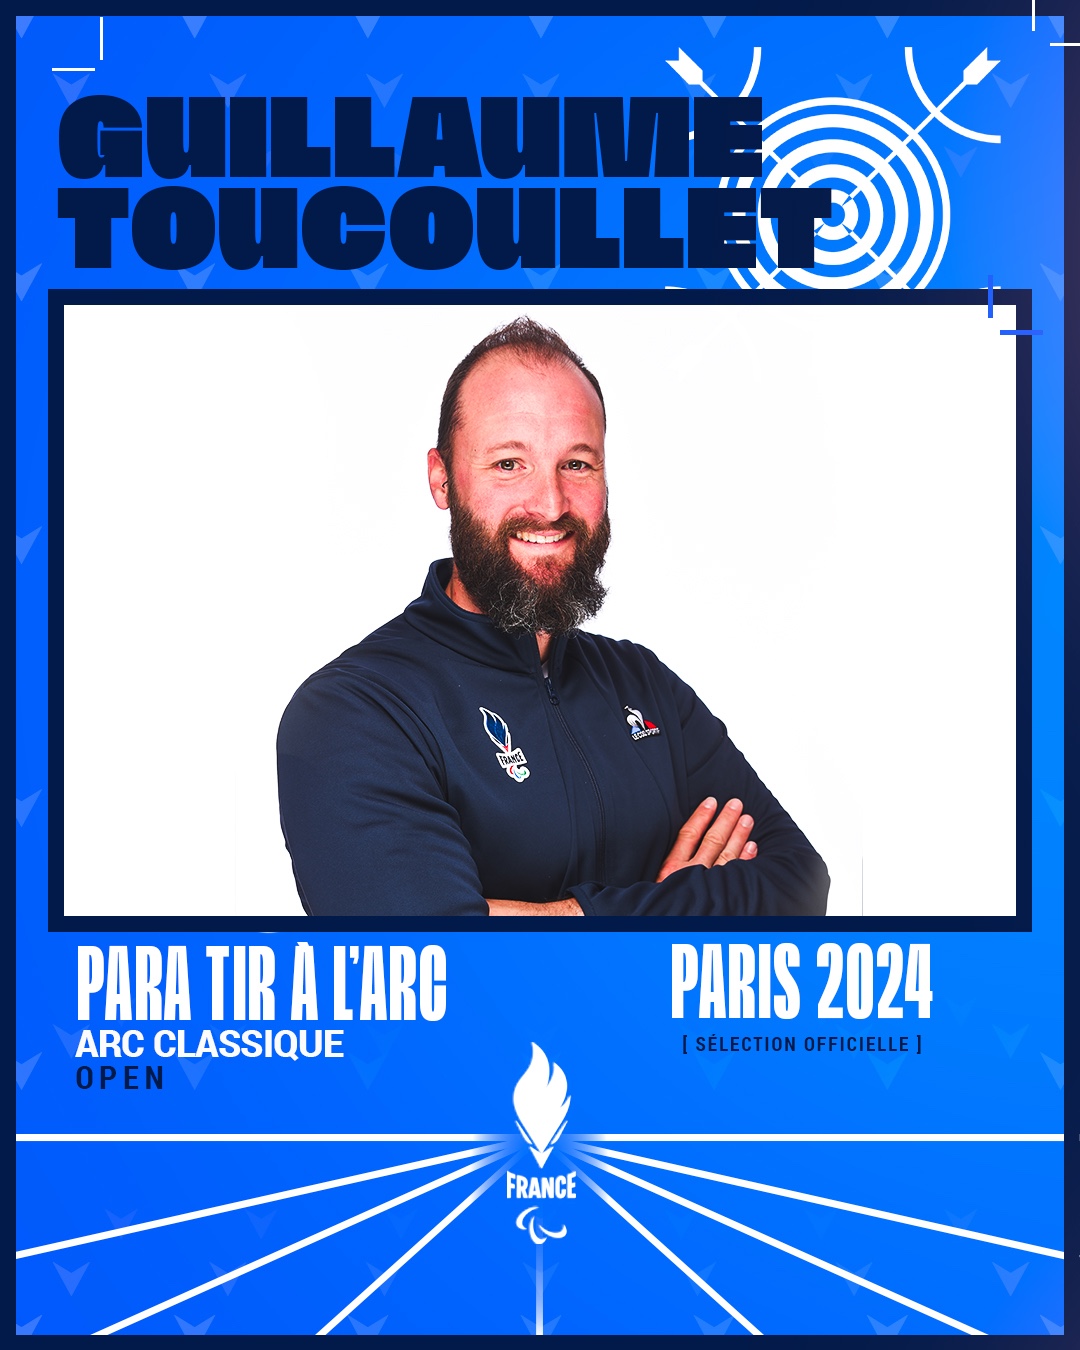 Guillaume Toucoulllet